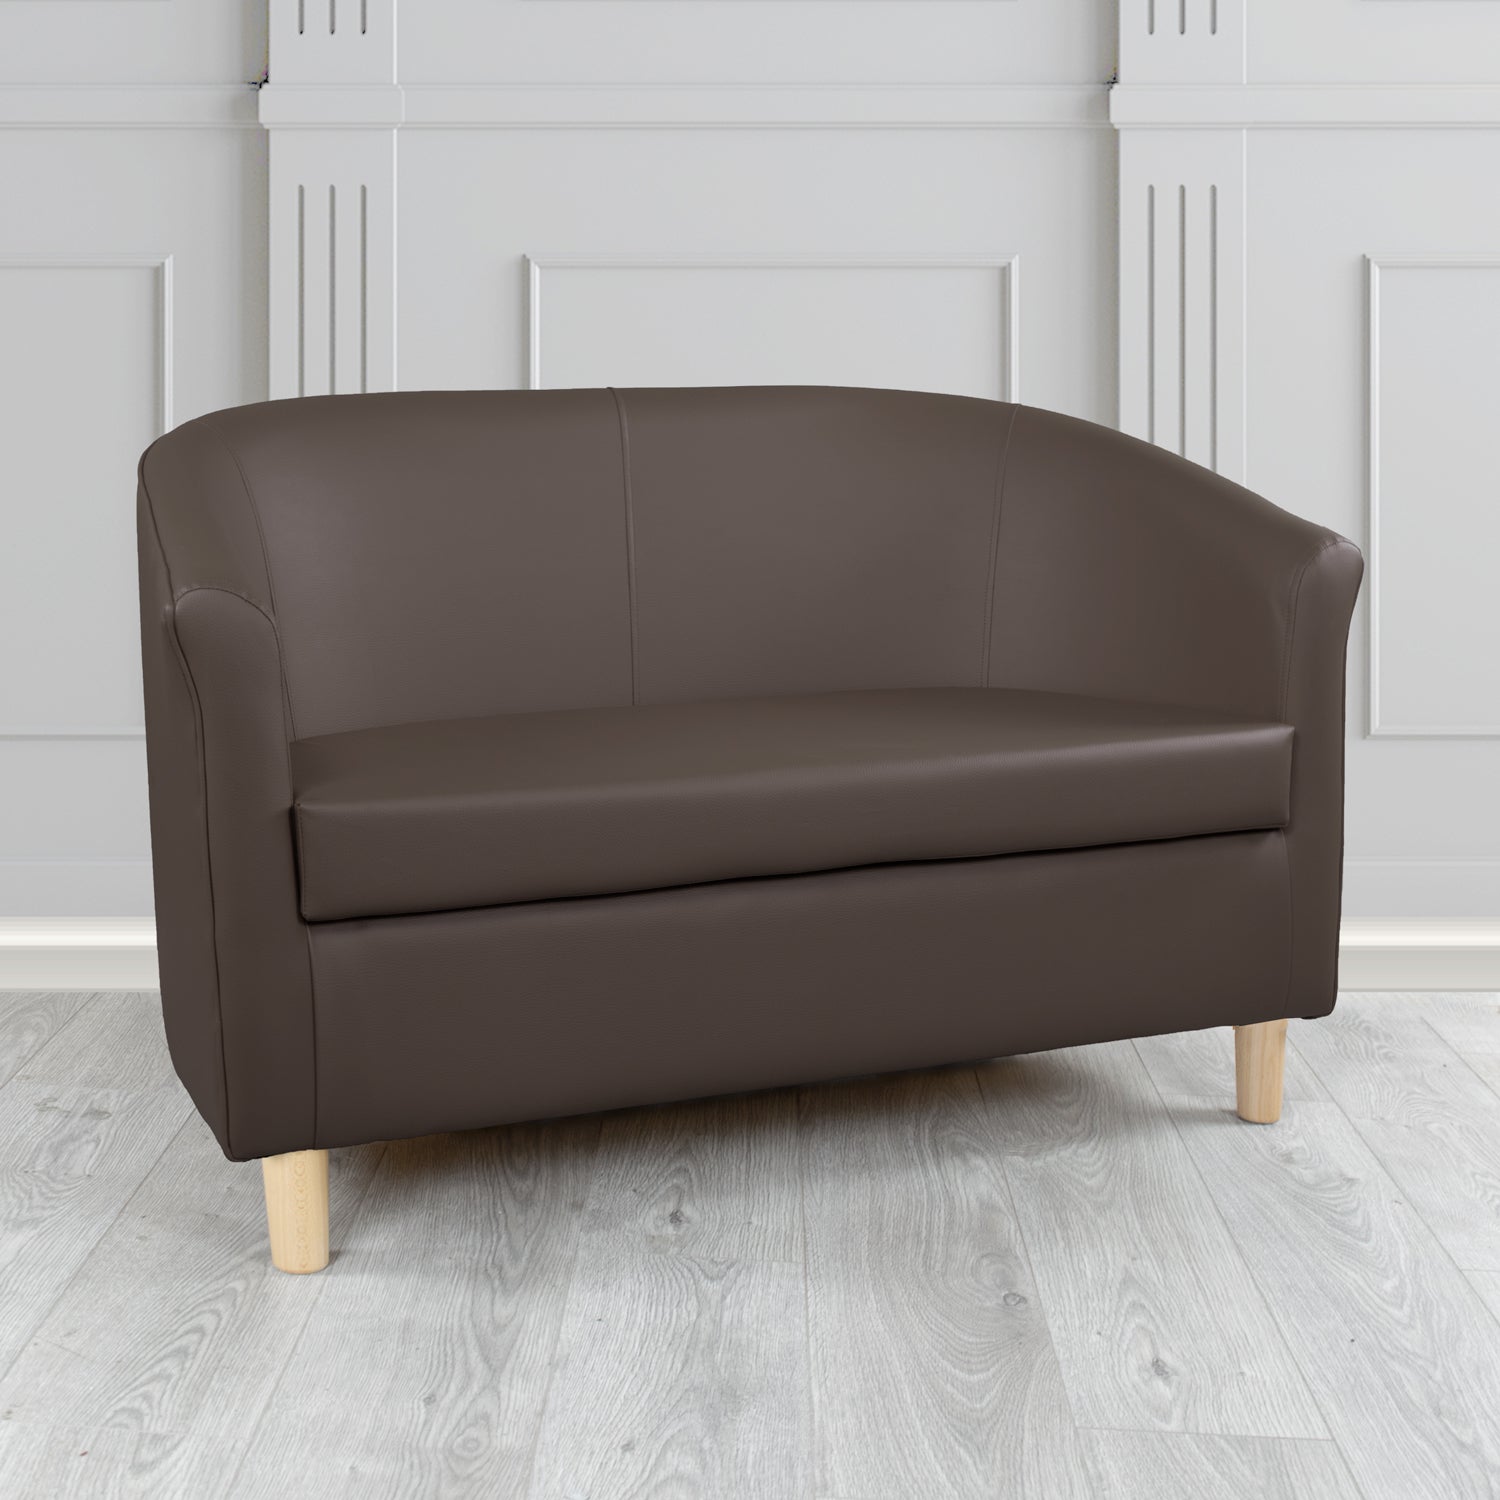 Tuscany 2 Seater Tub Sofa in Madrid Chocolate Faux Leather - The Tub Chair Shop